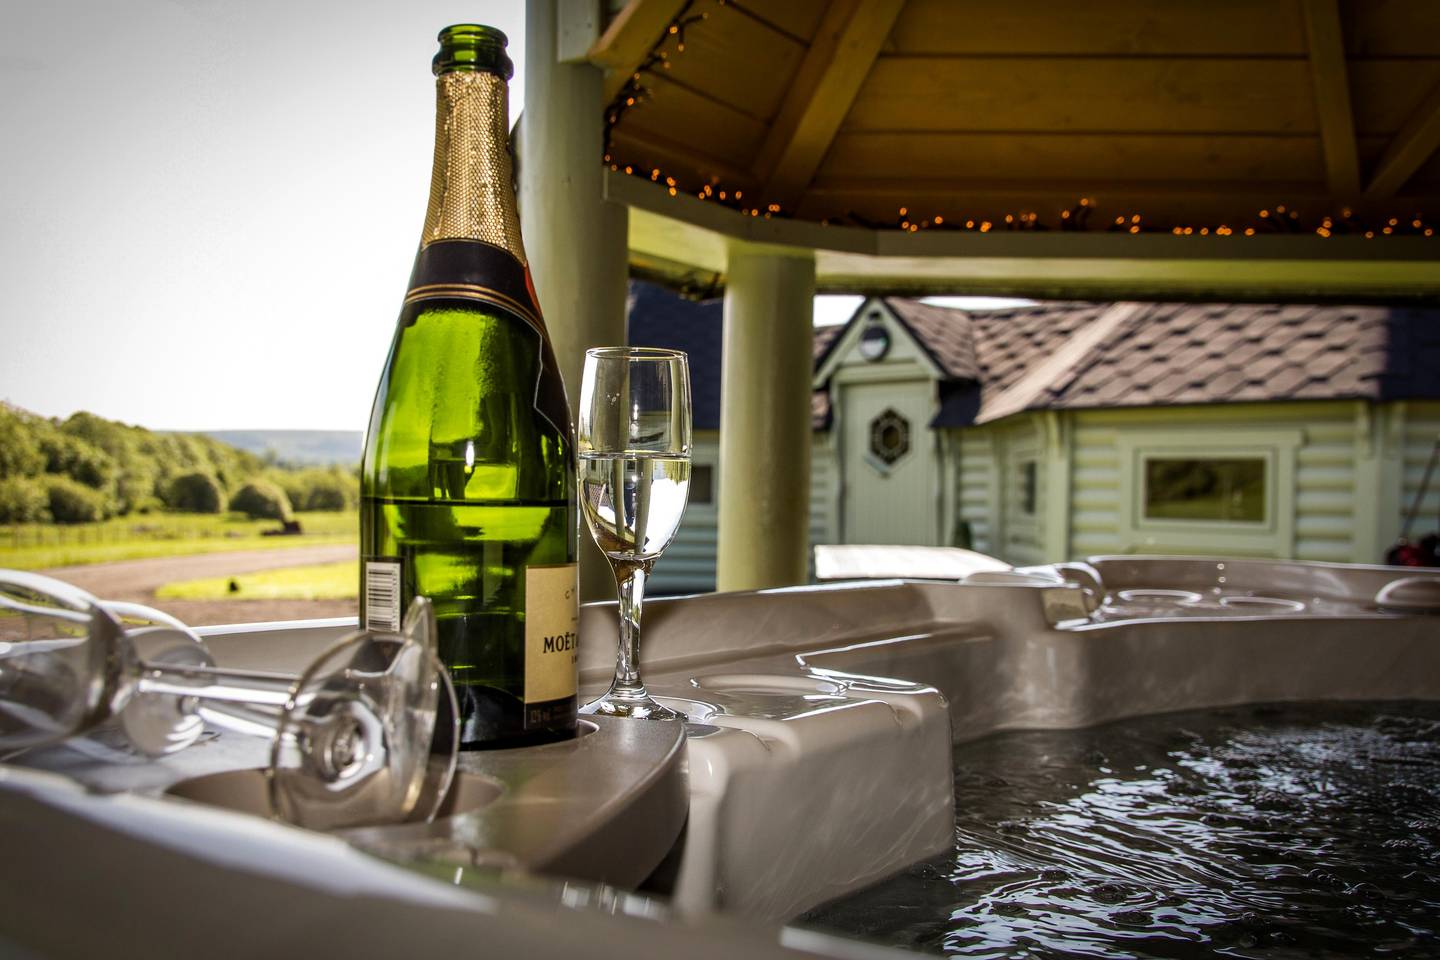 Hot Tub holidays in Loch Lomond and the Trossachs National Park